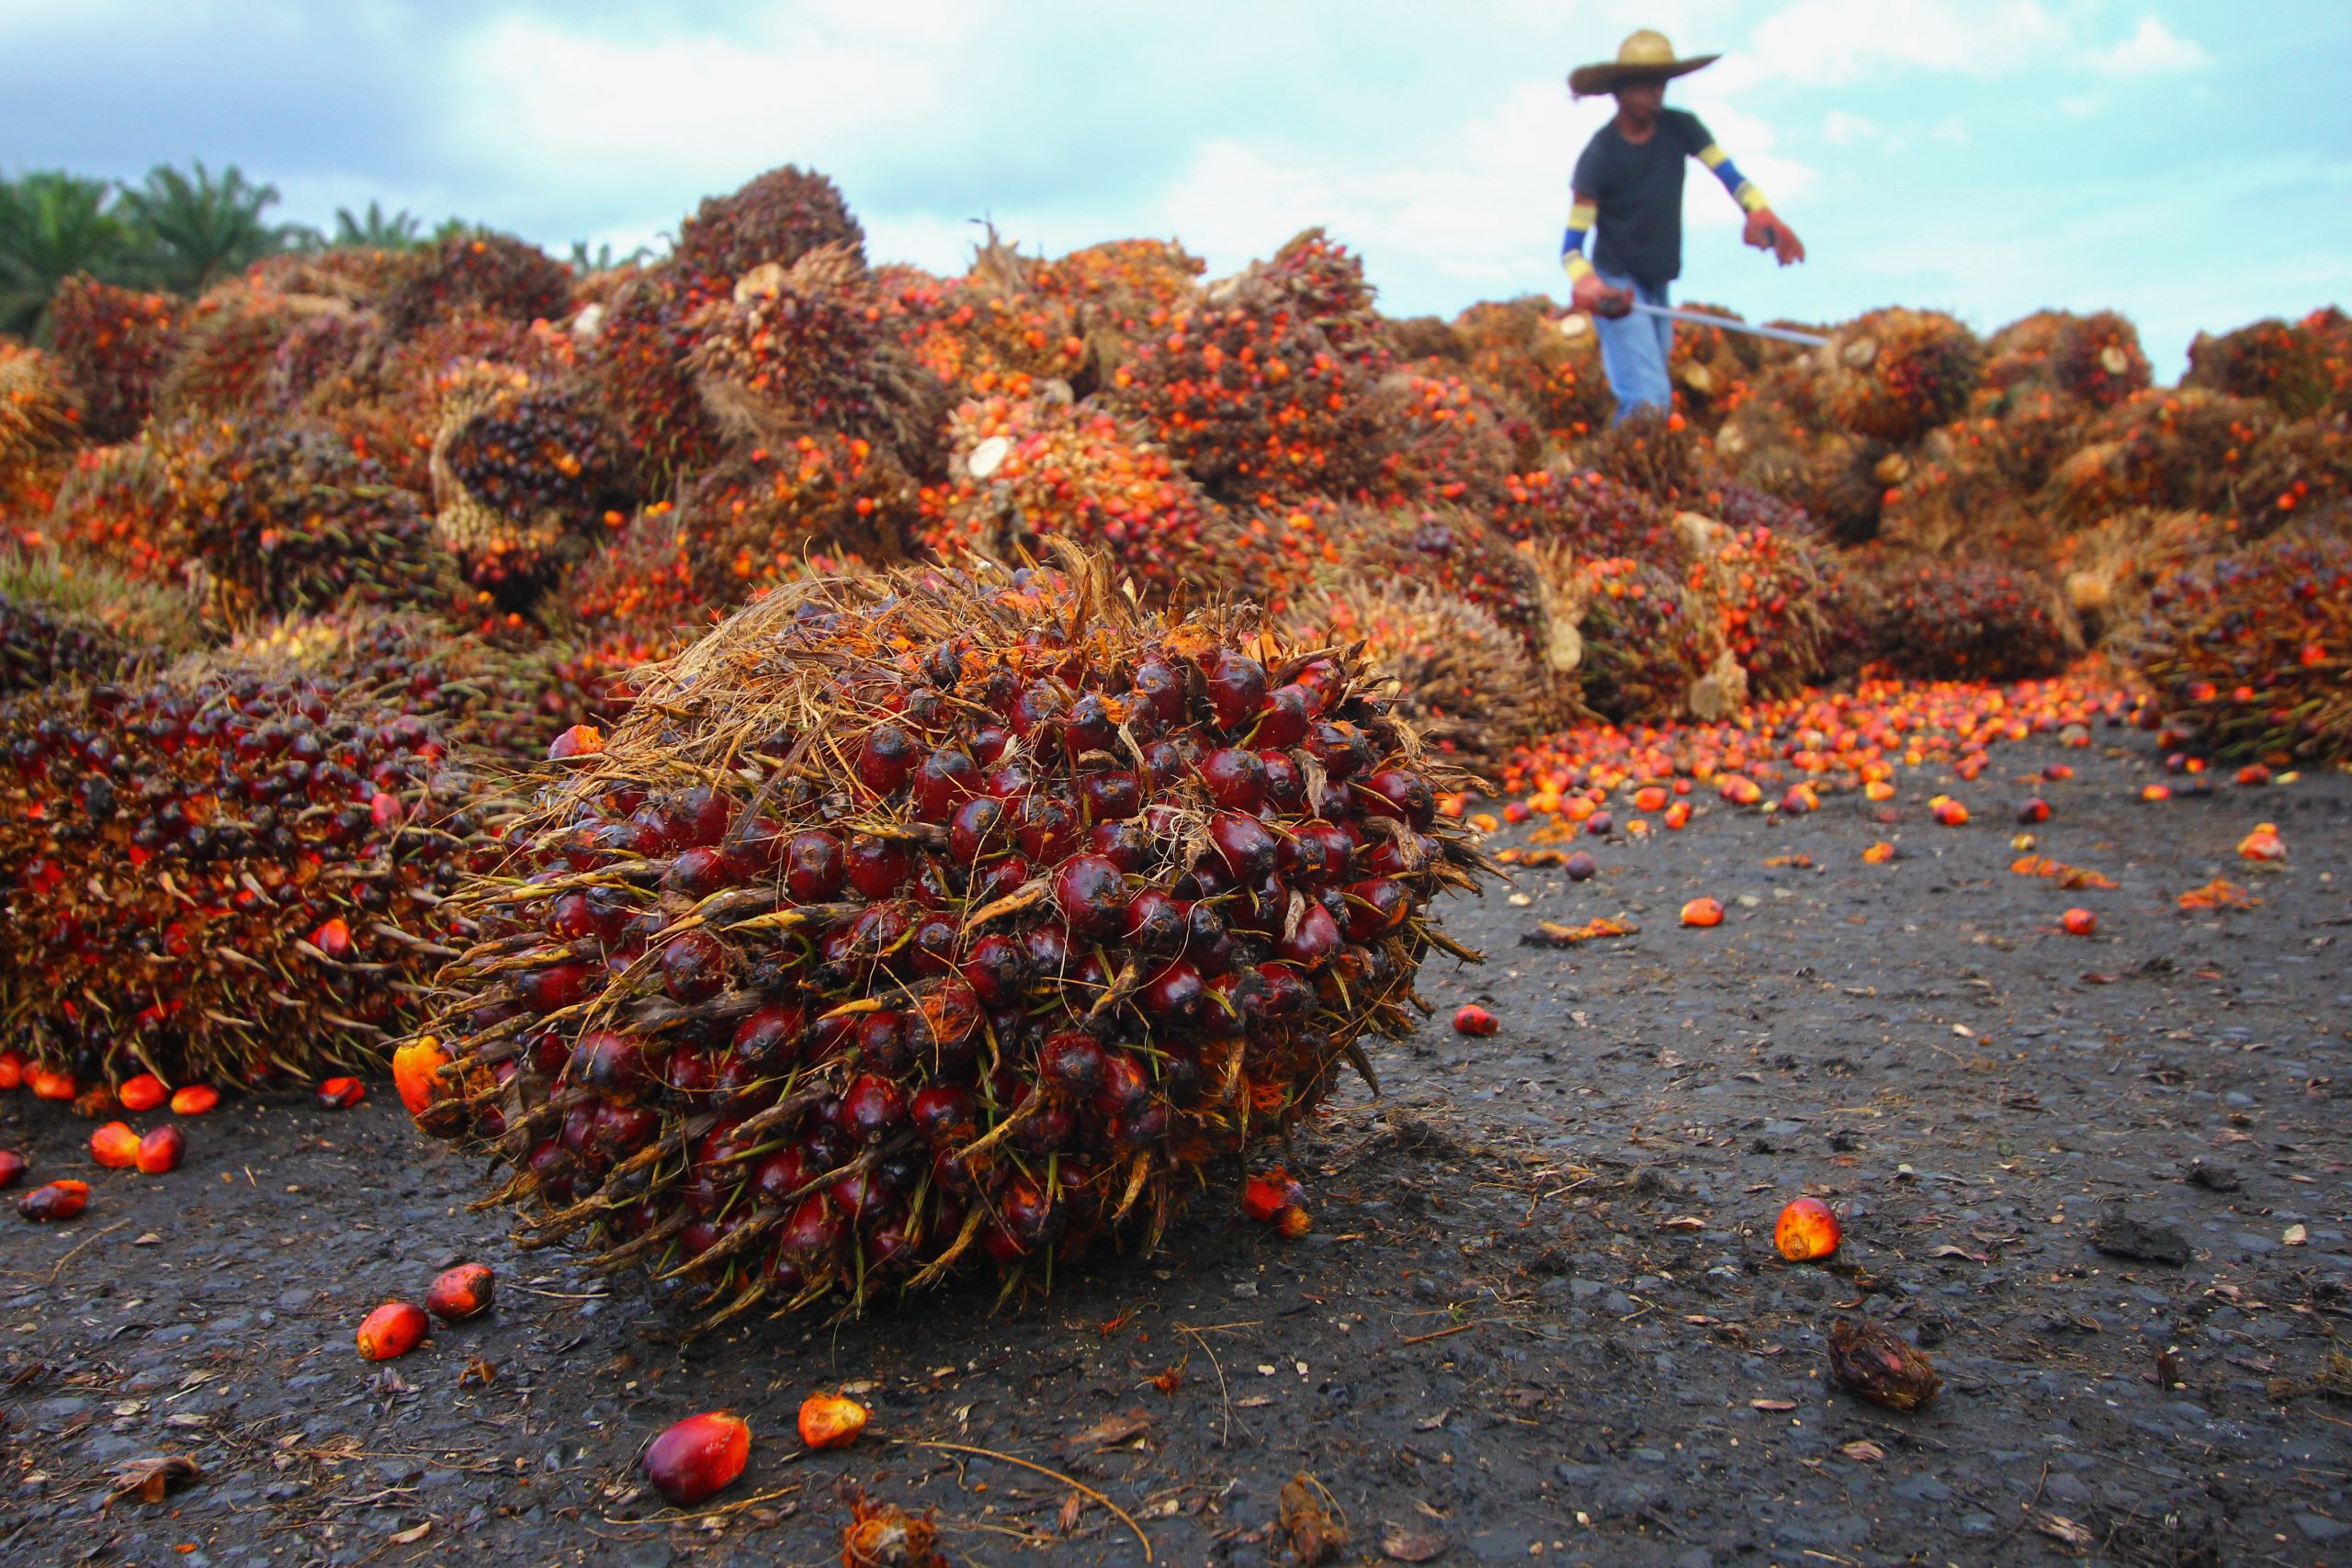 Nestlé asks consumers what they would do in the quest for sustainable palm oil